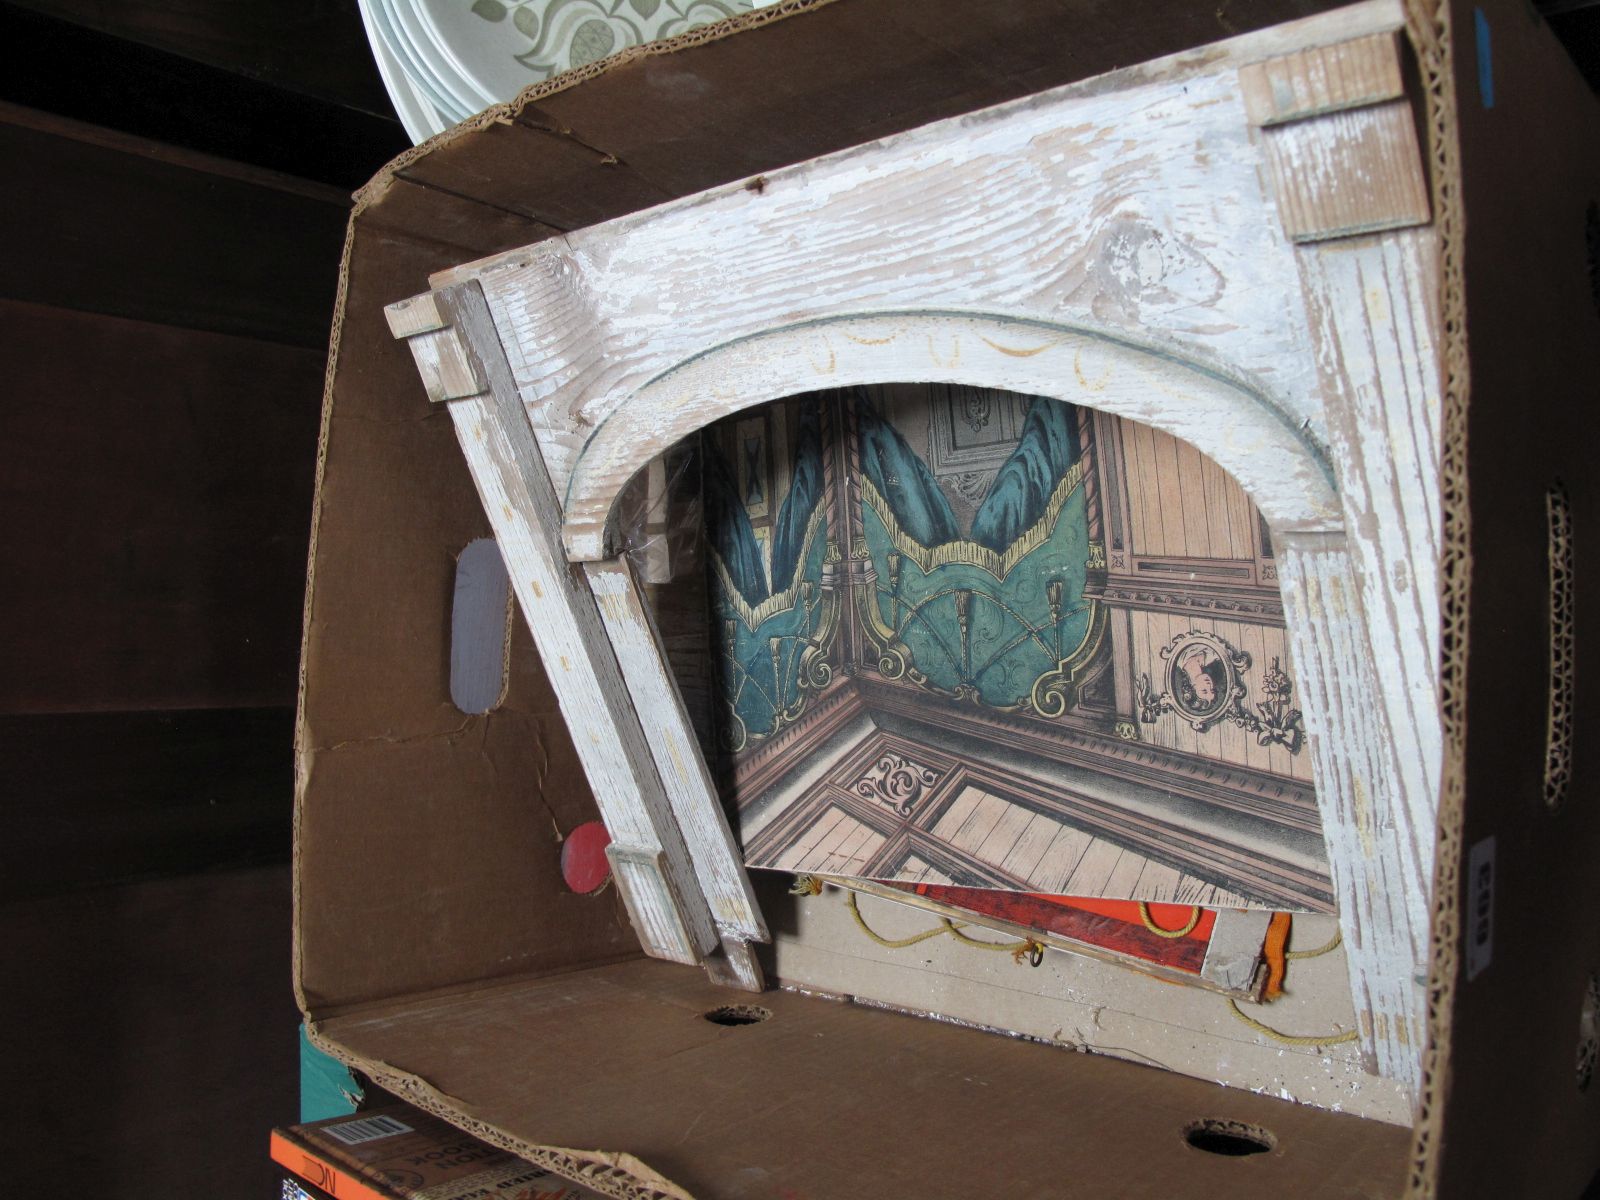 Pollocks Wood/Paper Toy Theatre, early/mid XX Century, playworn with scenery etc.